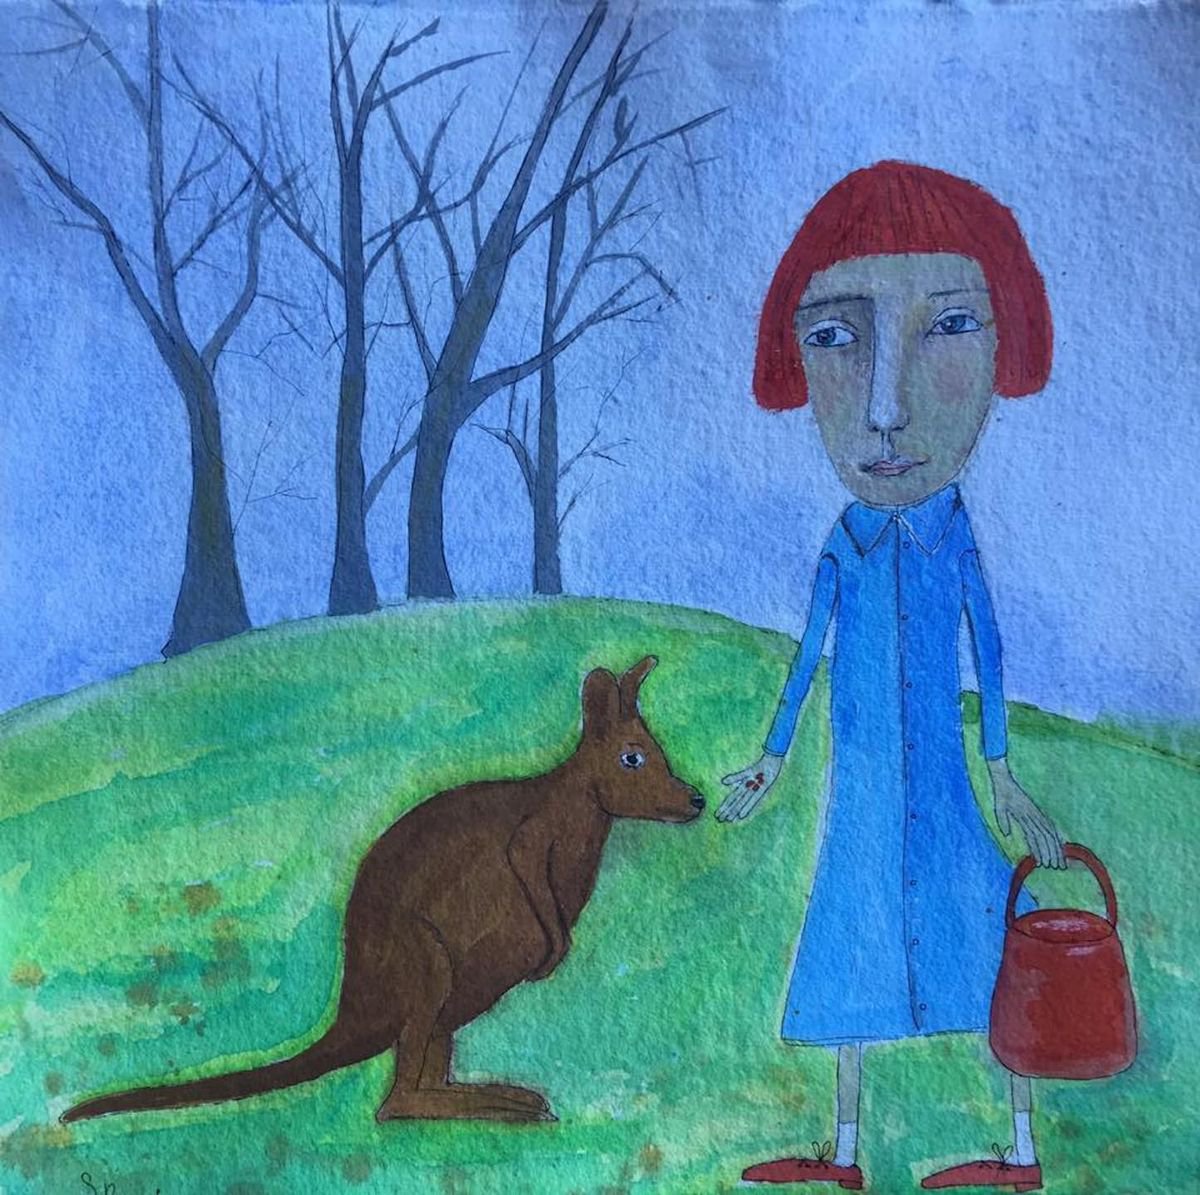 The Girl and the Wallaby by Sharyn Bursic